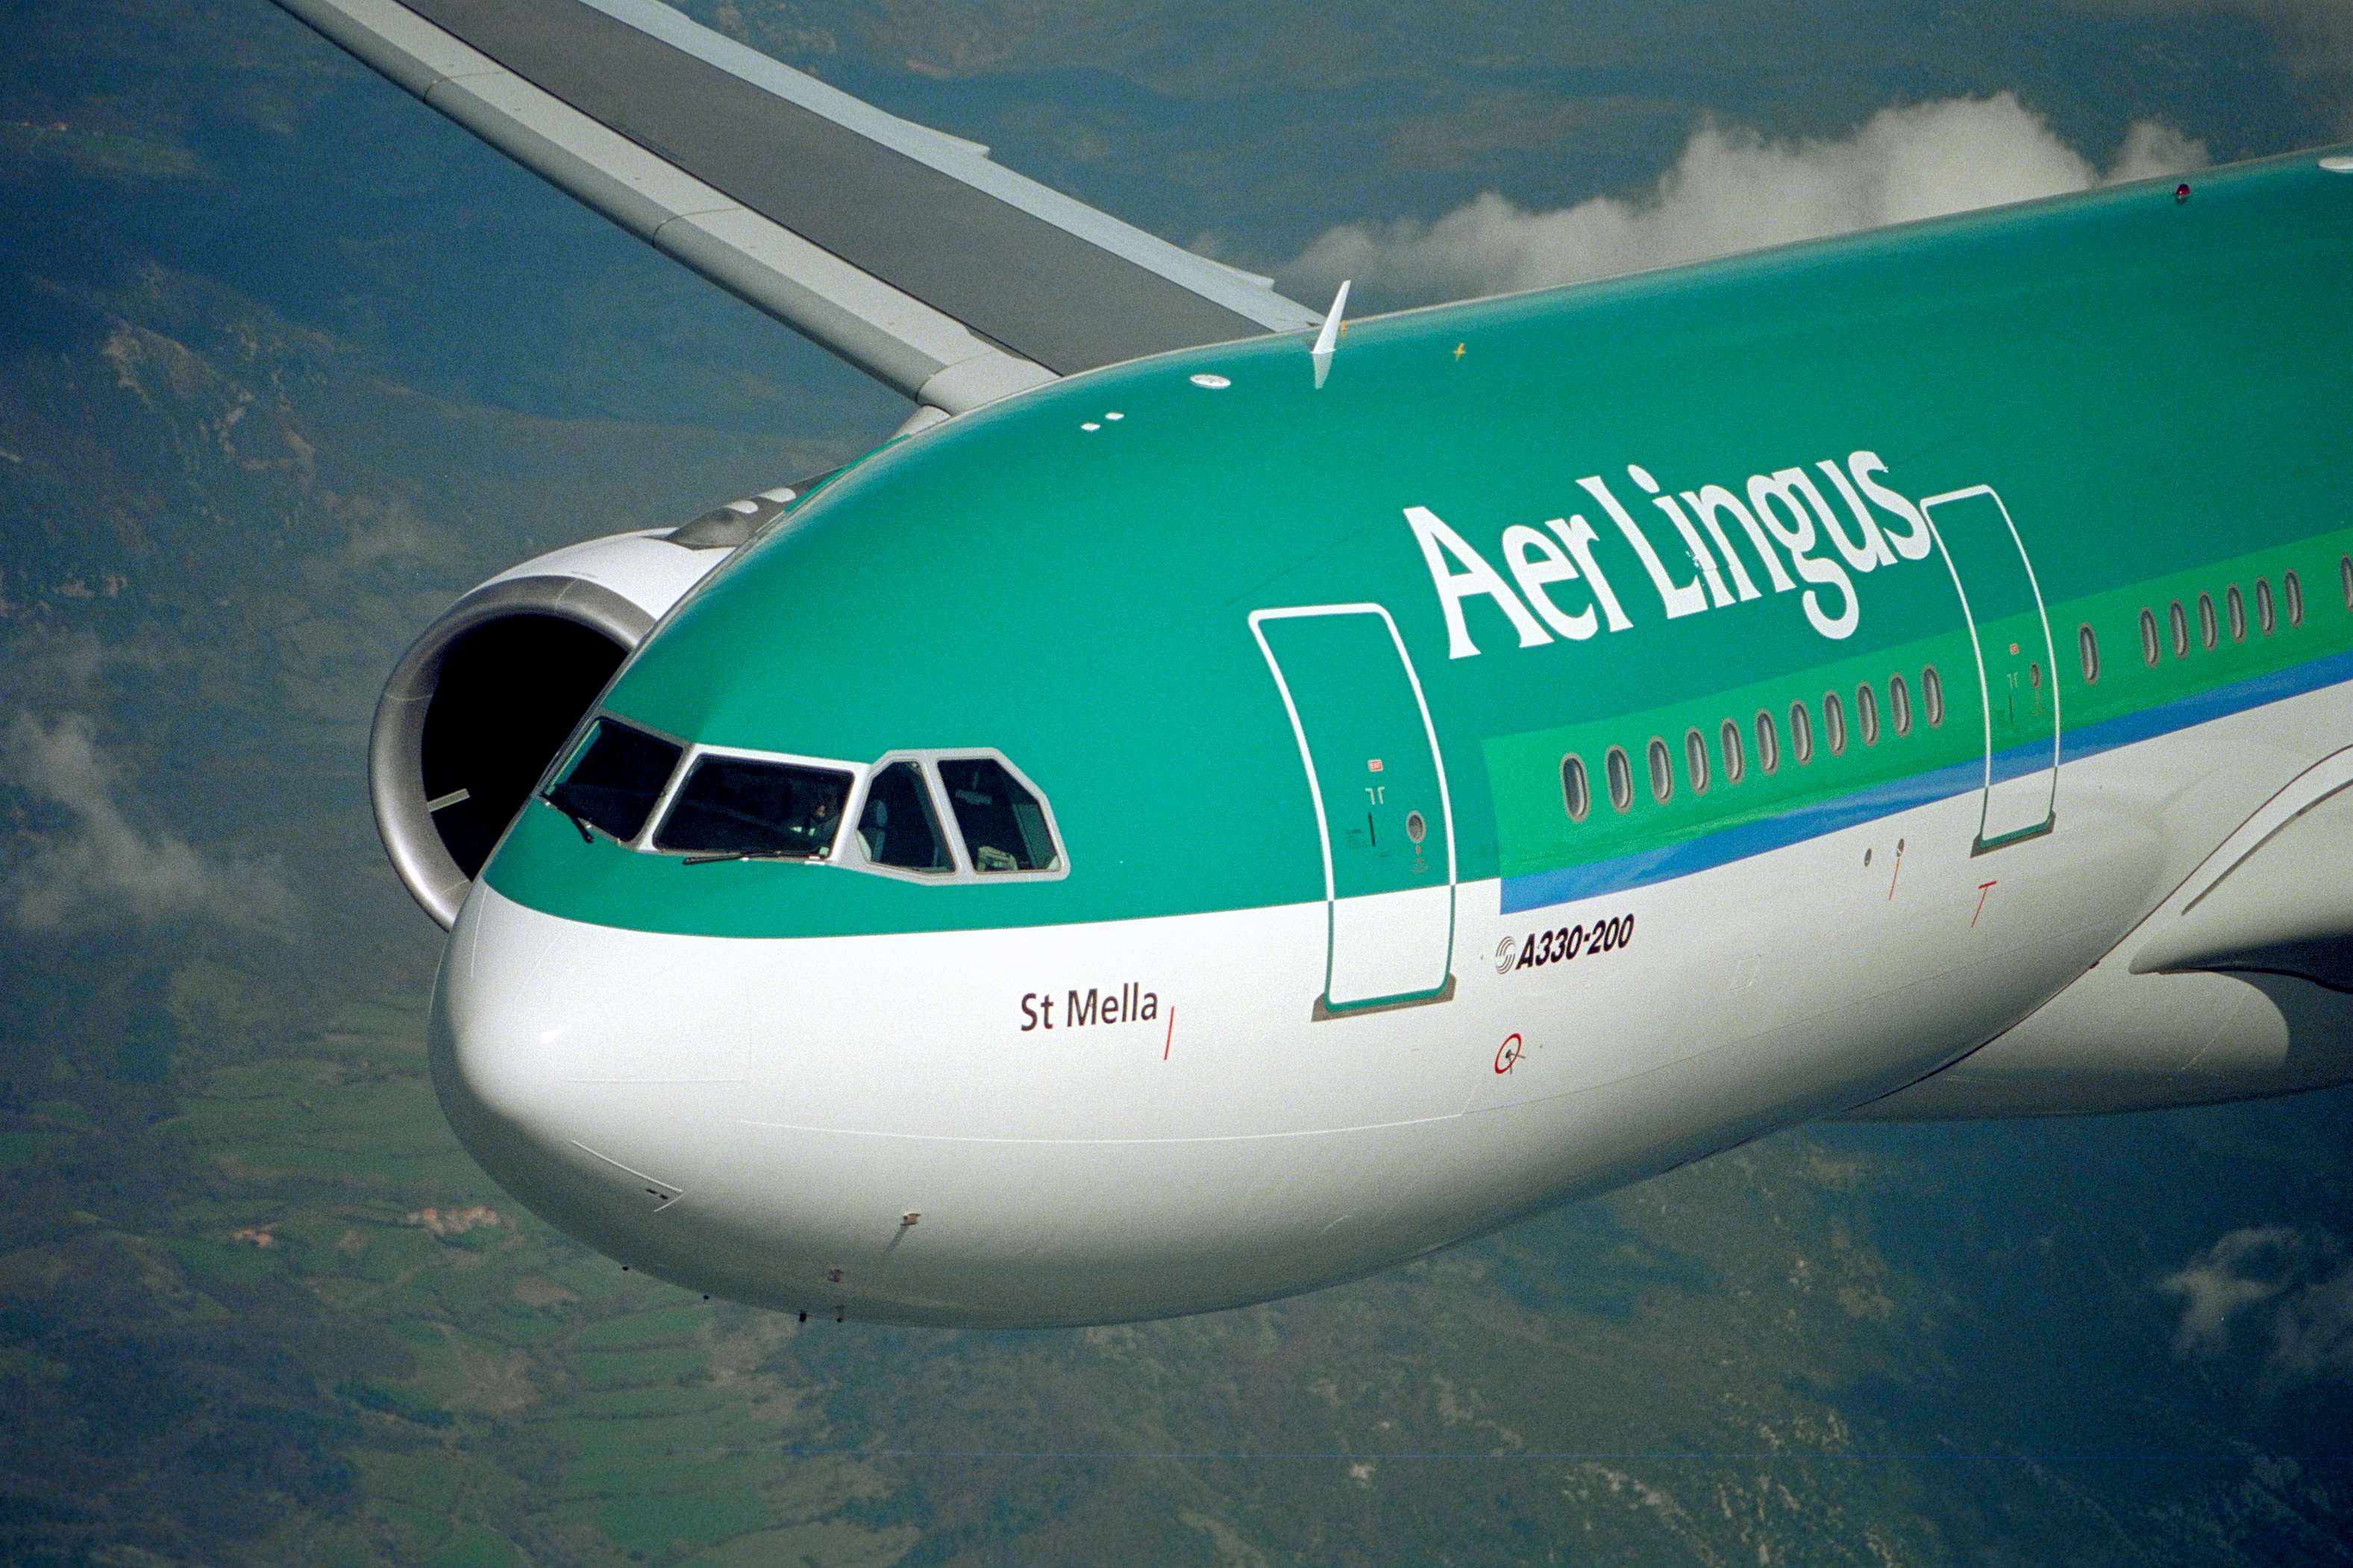 aer lingus cancel within 24 hours